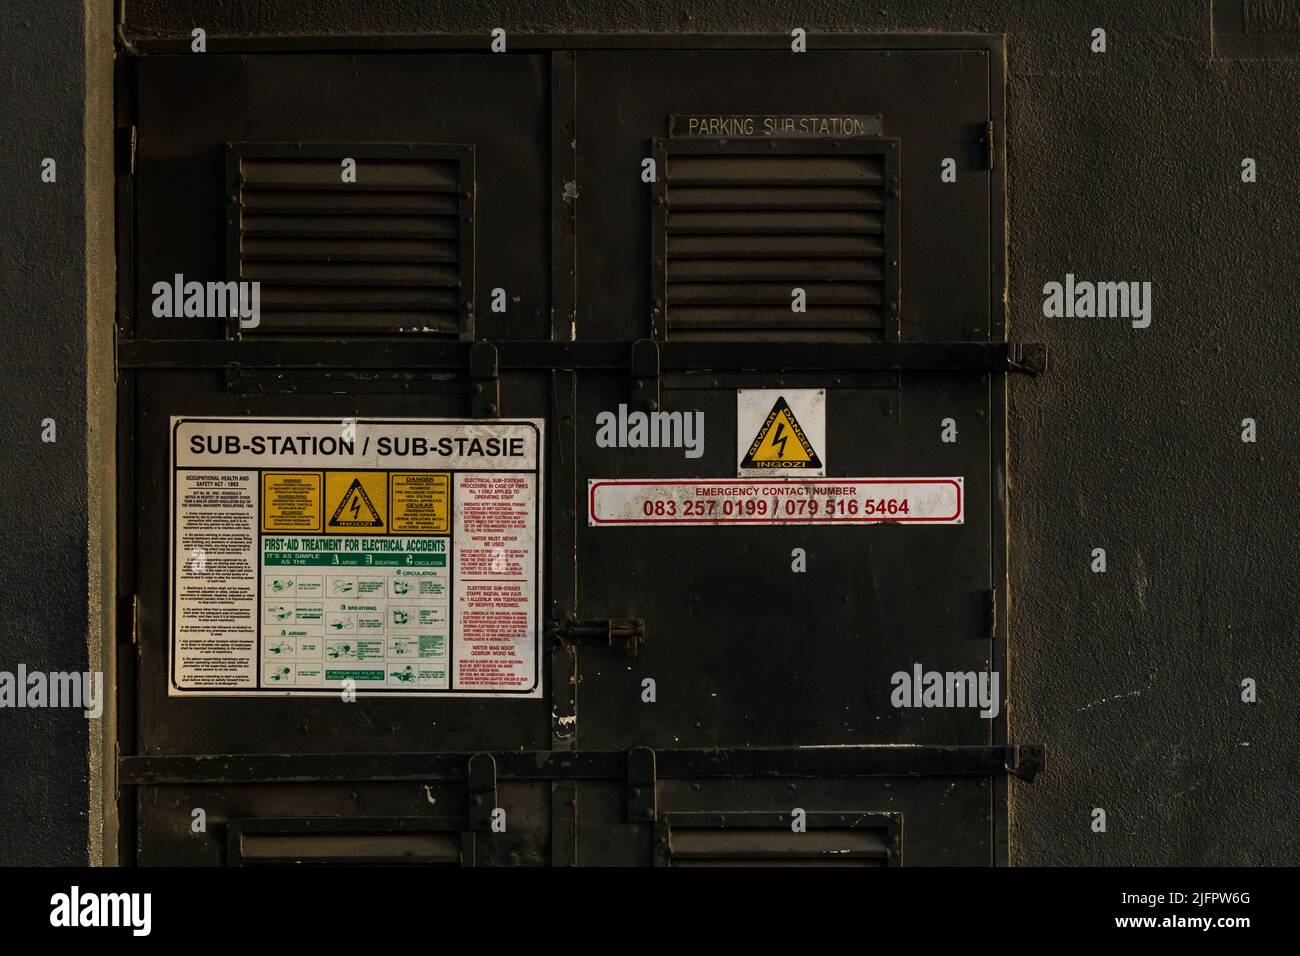 electricity substation or sub station door showing first aid directions and information for emergency use as well as danger sign or signage, Cape Town Stock Photo